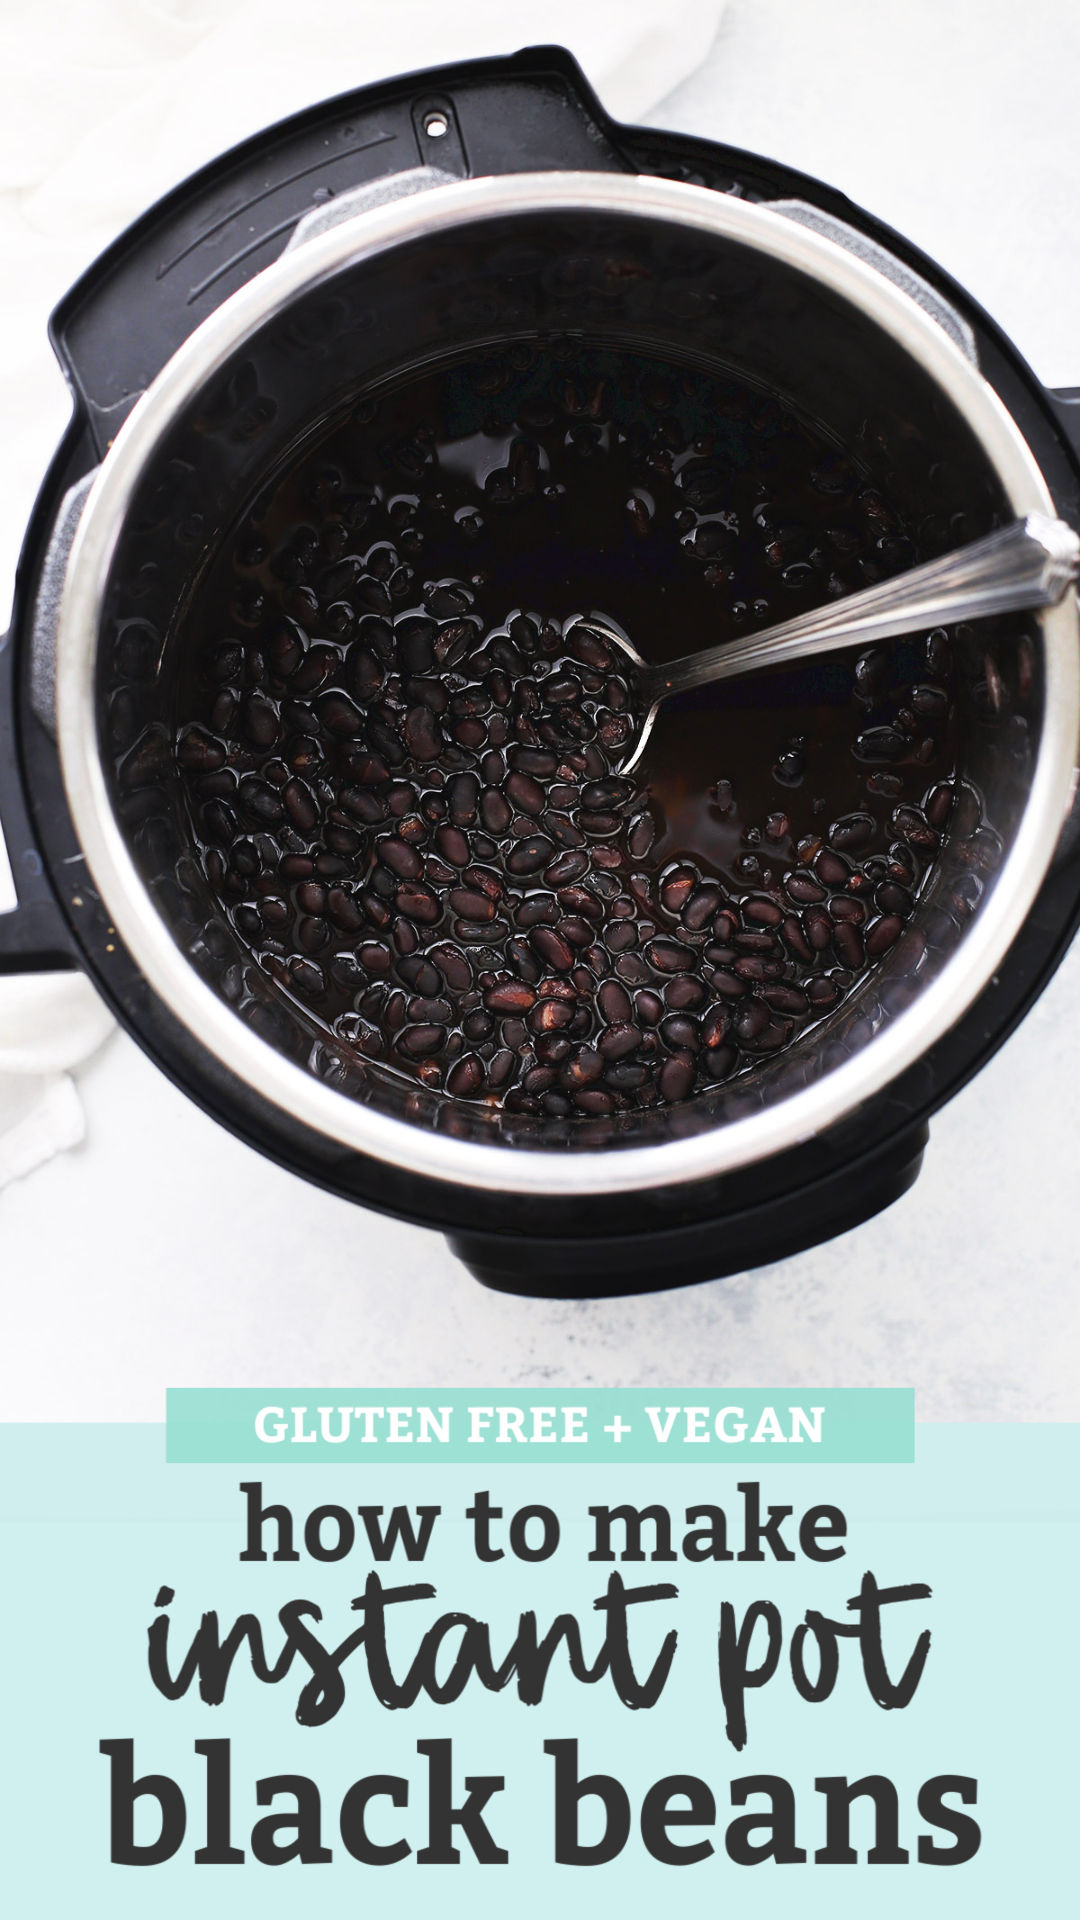 Instant Pot Black Beans Tutorial from One Lovely Life